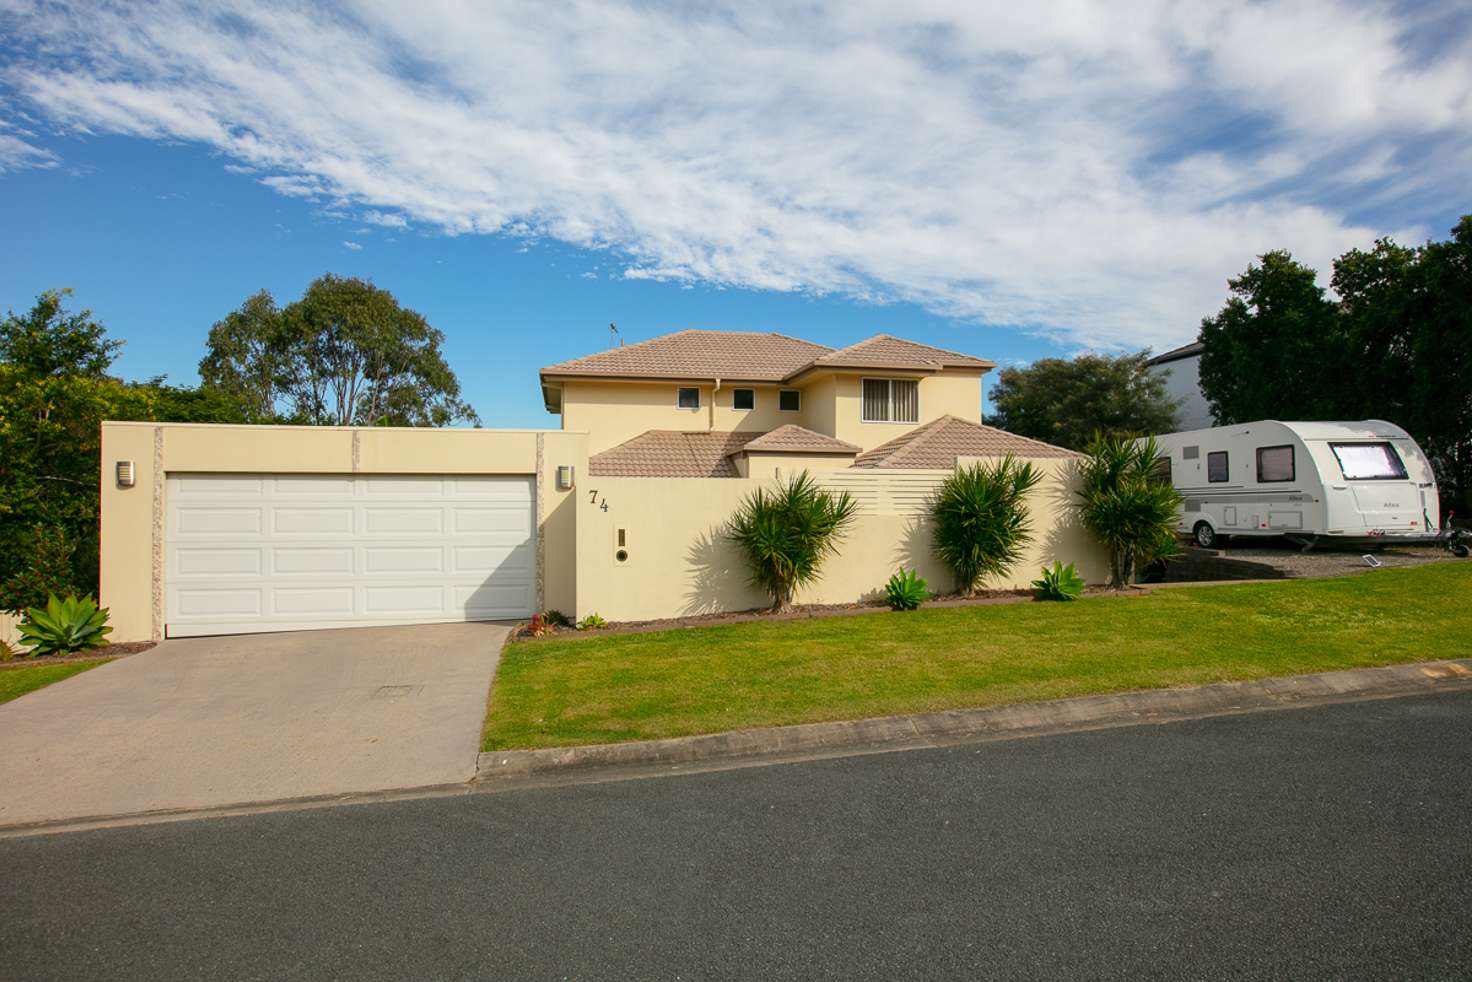 Main view of Homely house listing, 74 Christina Ryan Way, Arundel QLD 4214